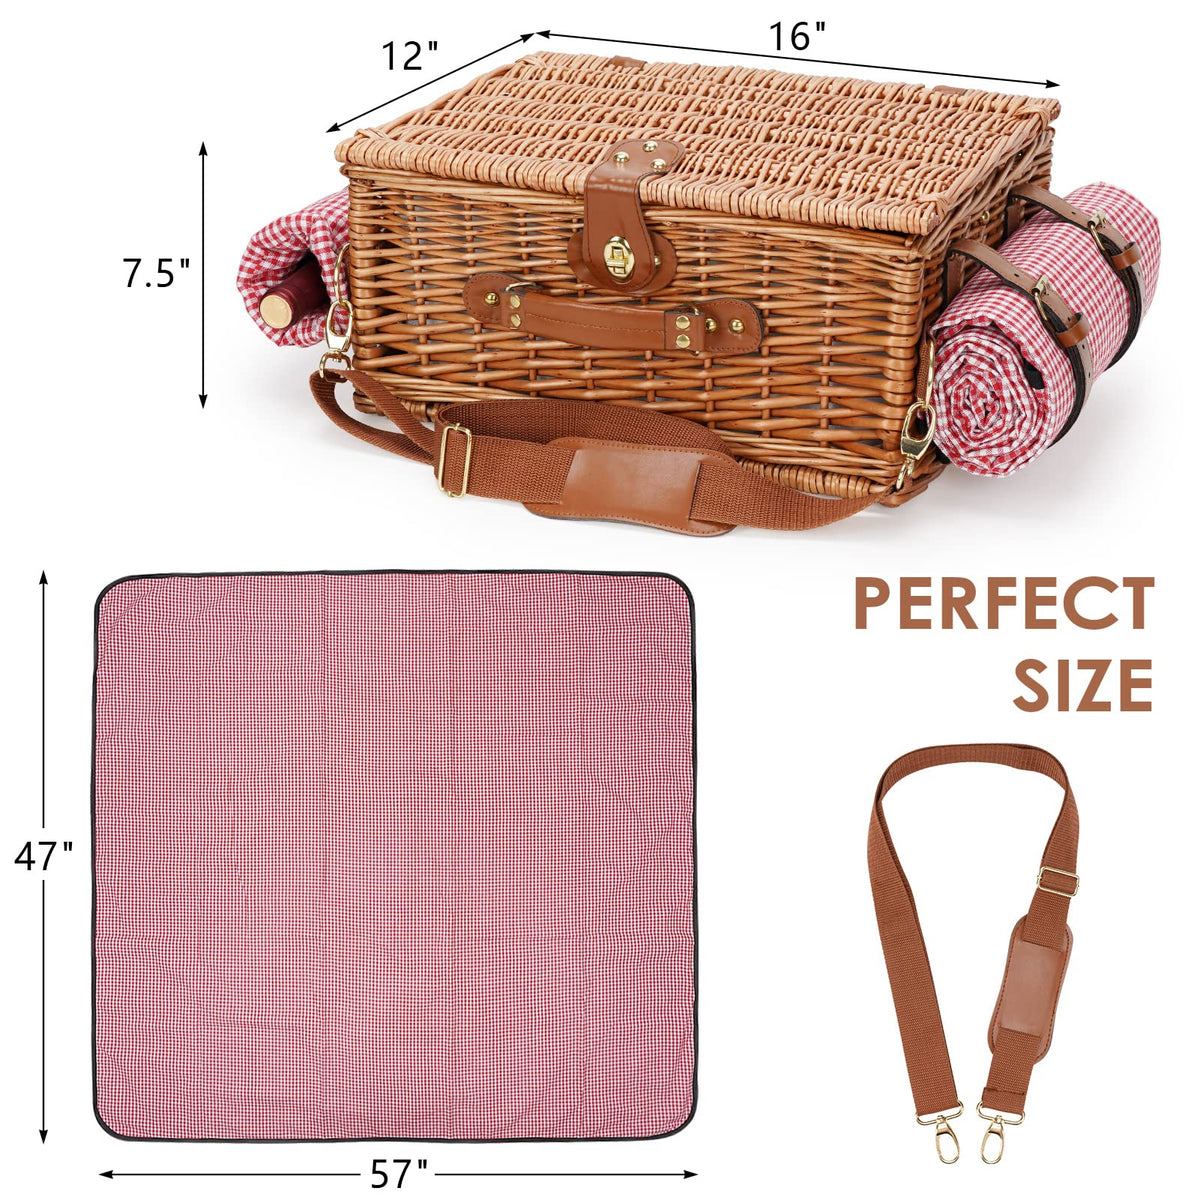 Adorable & Exquisite Picnic Basket for 4 Persons